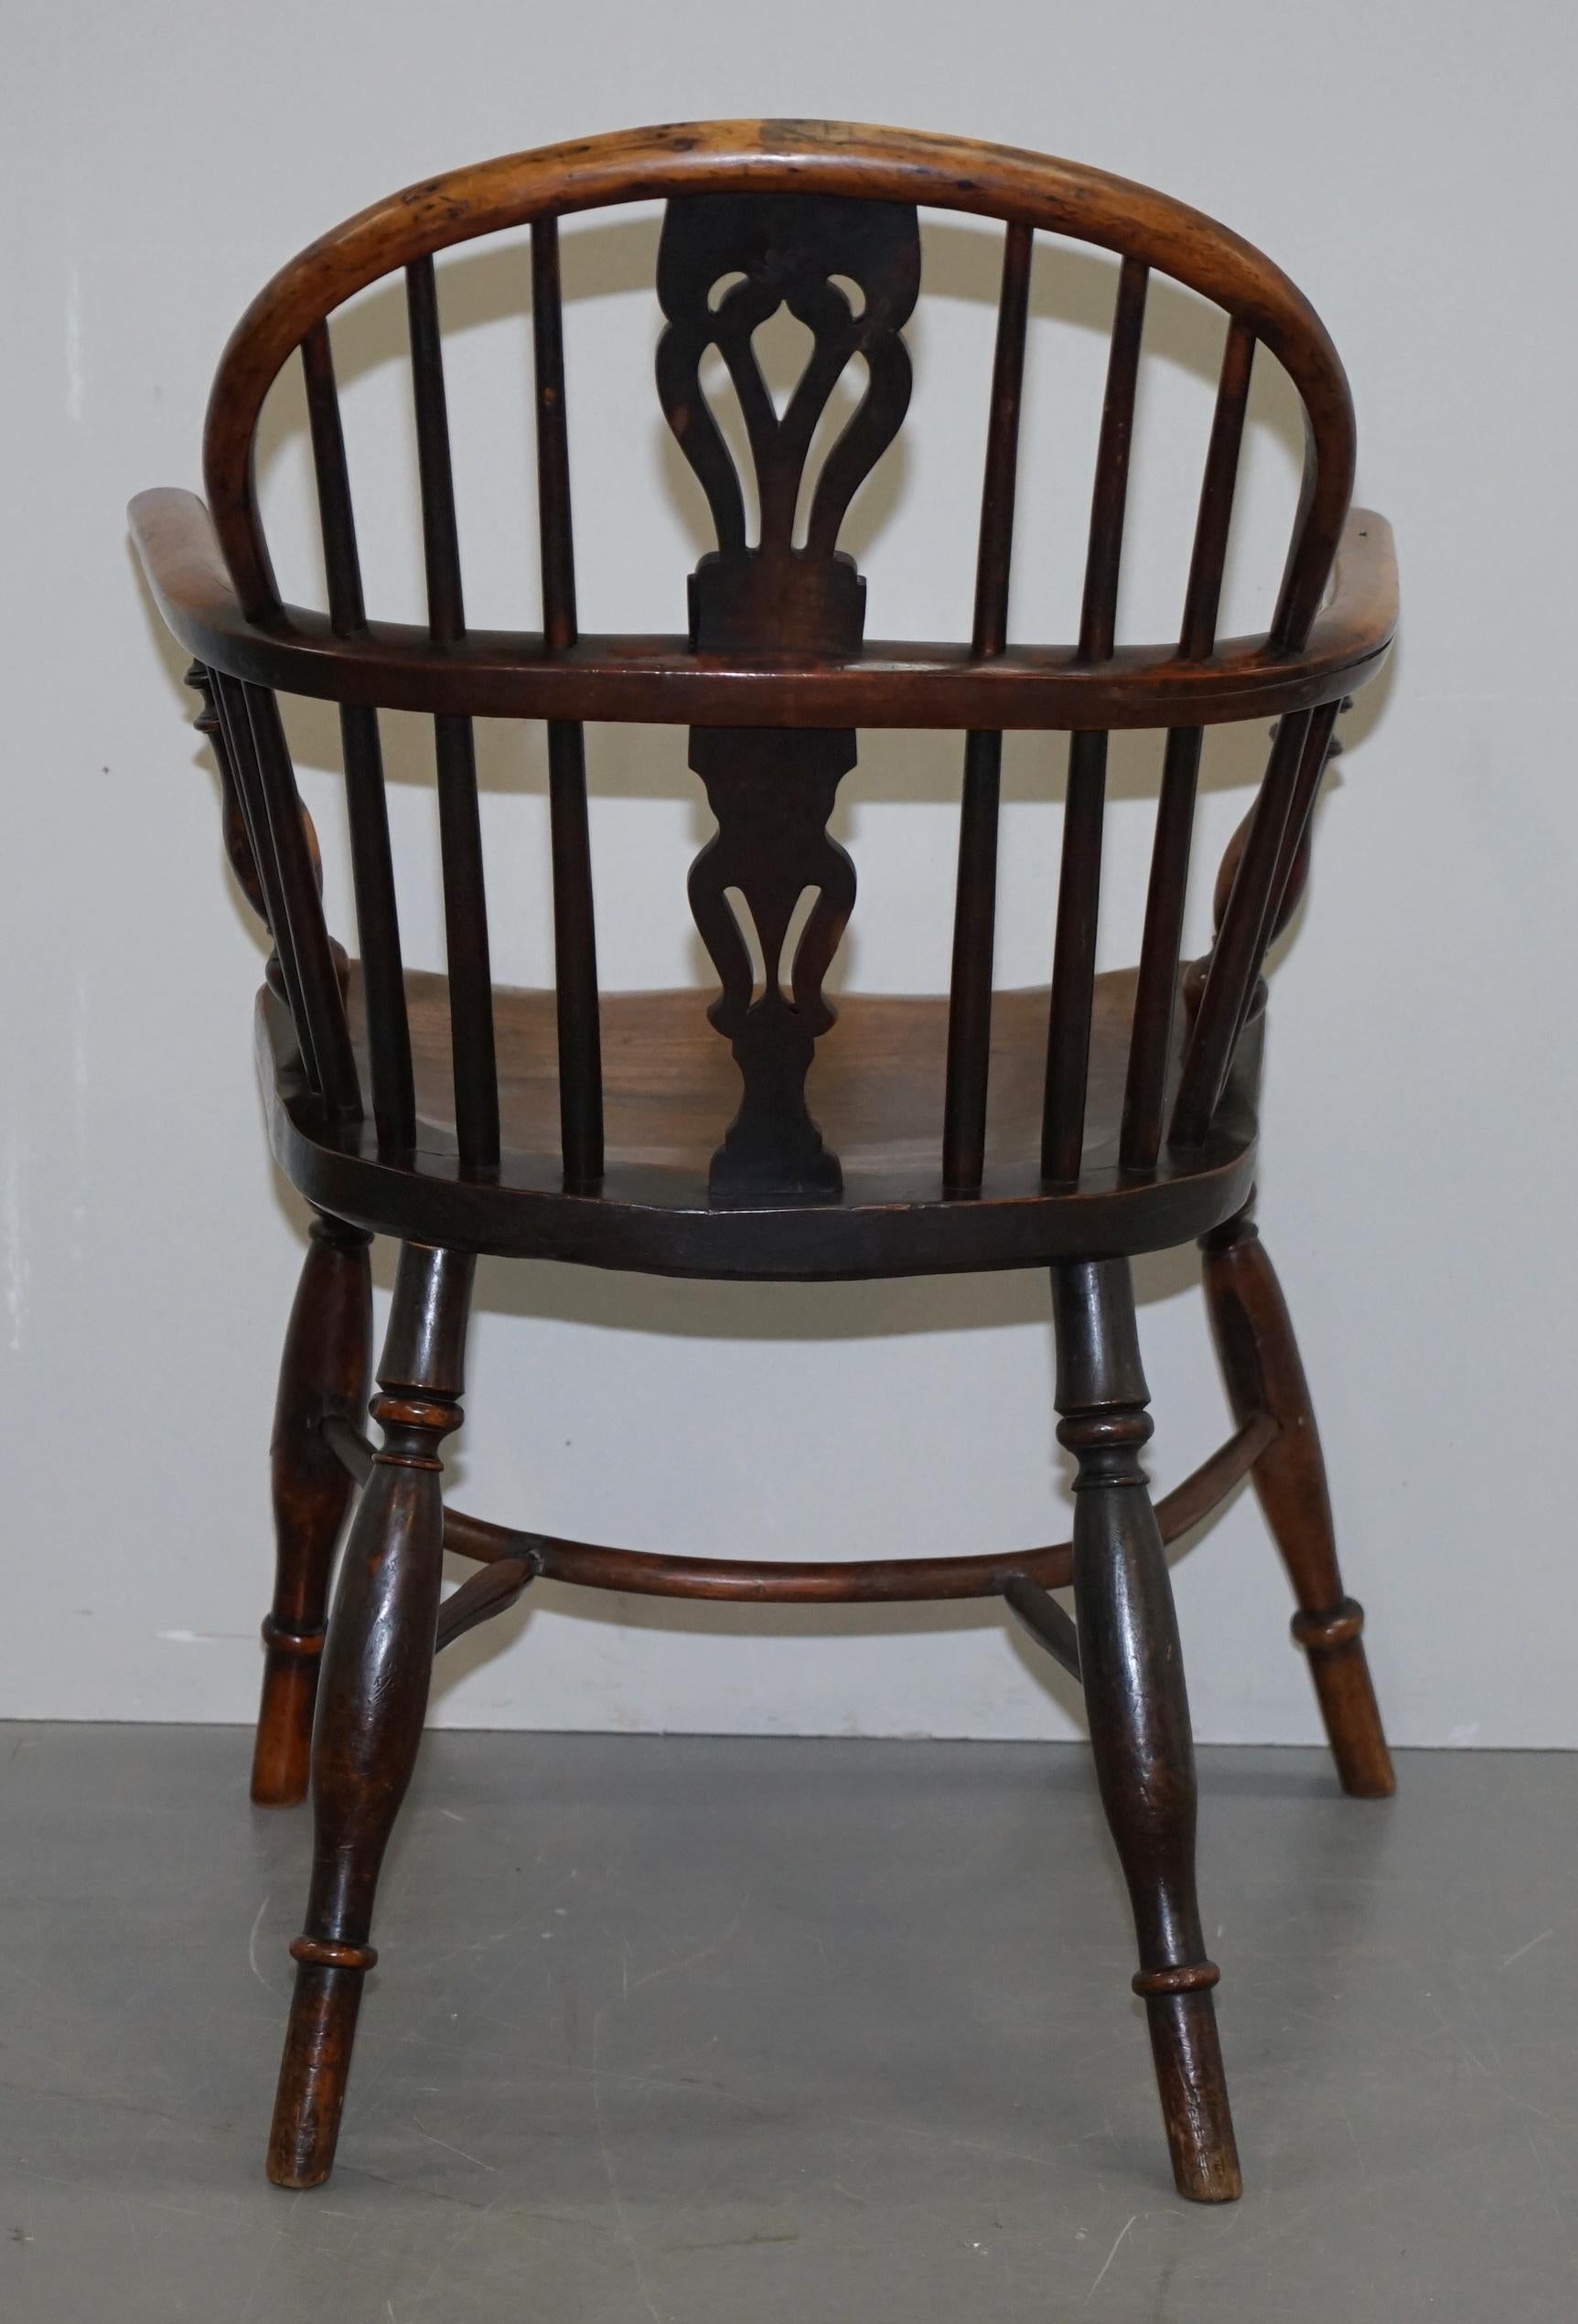 1 of 6 Burr Yew Wood and Elm Windsor Armchairs circa 1860 English Country House 11